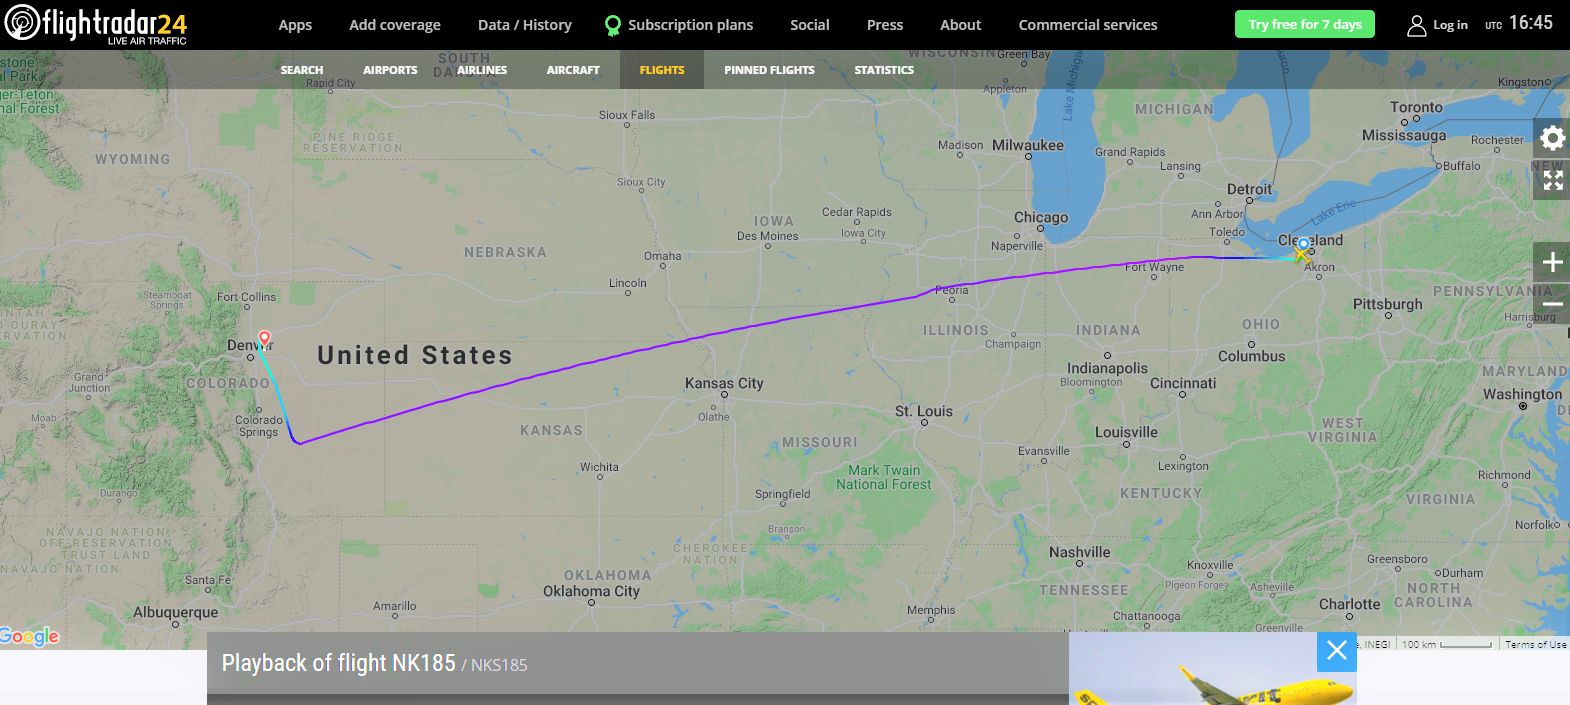 On Wednesday, a Spirit Airlines flight (NK185) from Cleveland to Los Angeles had to divert to Denver, after an unruly passenger...